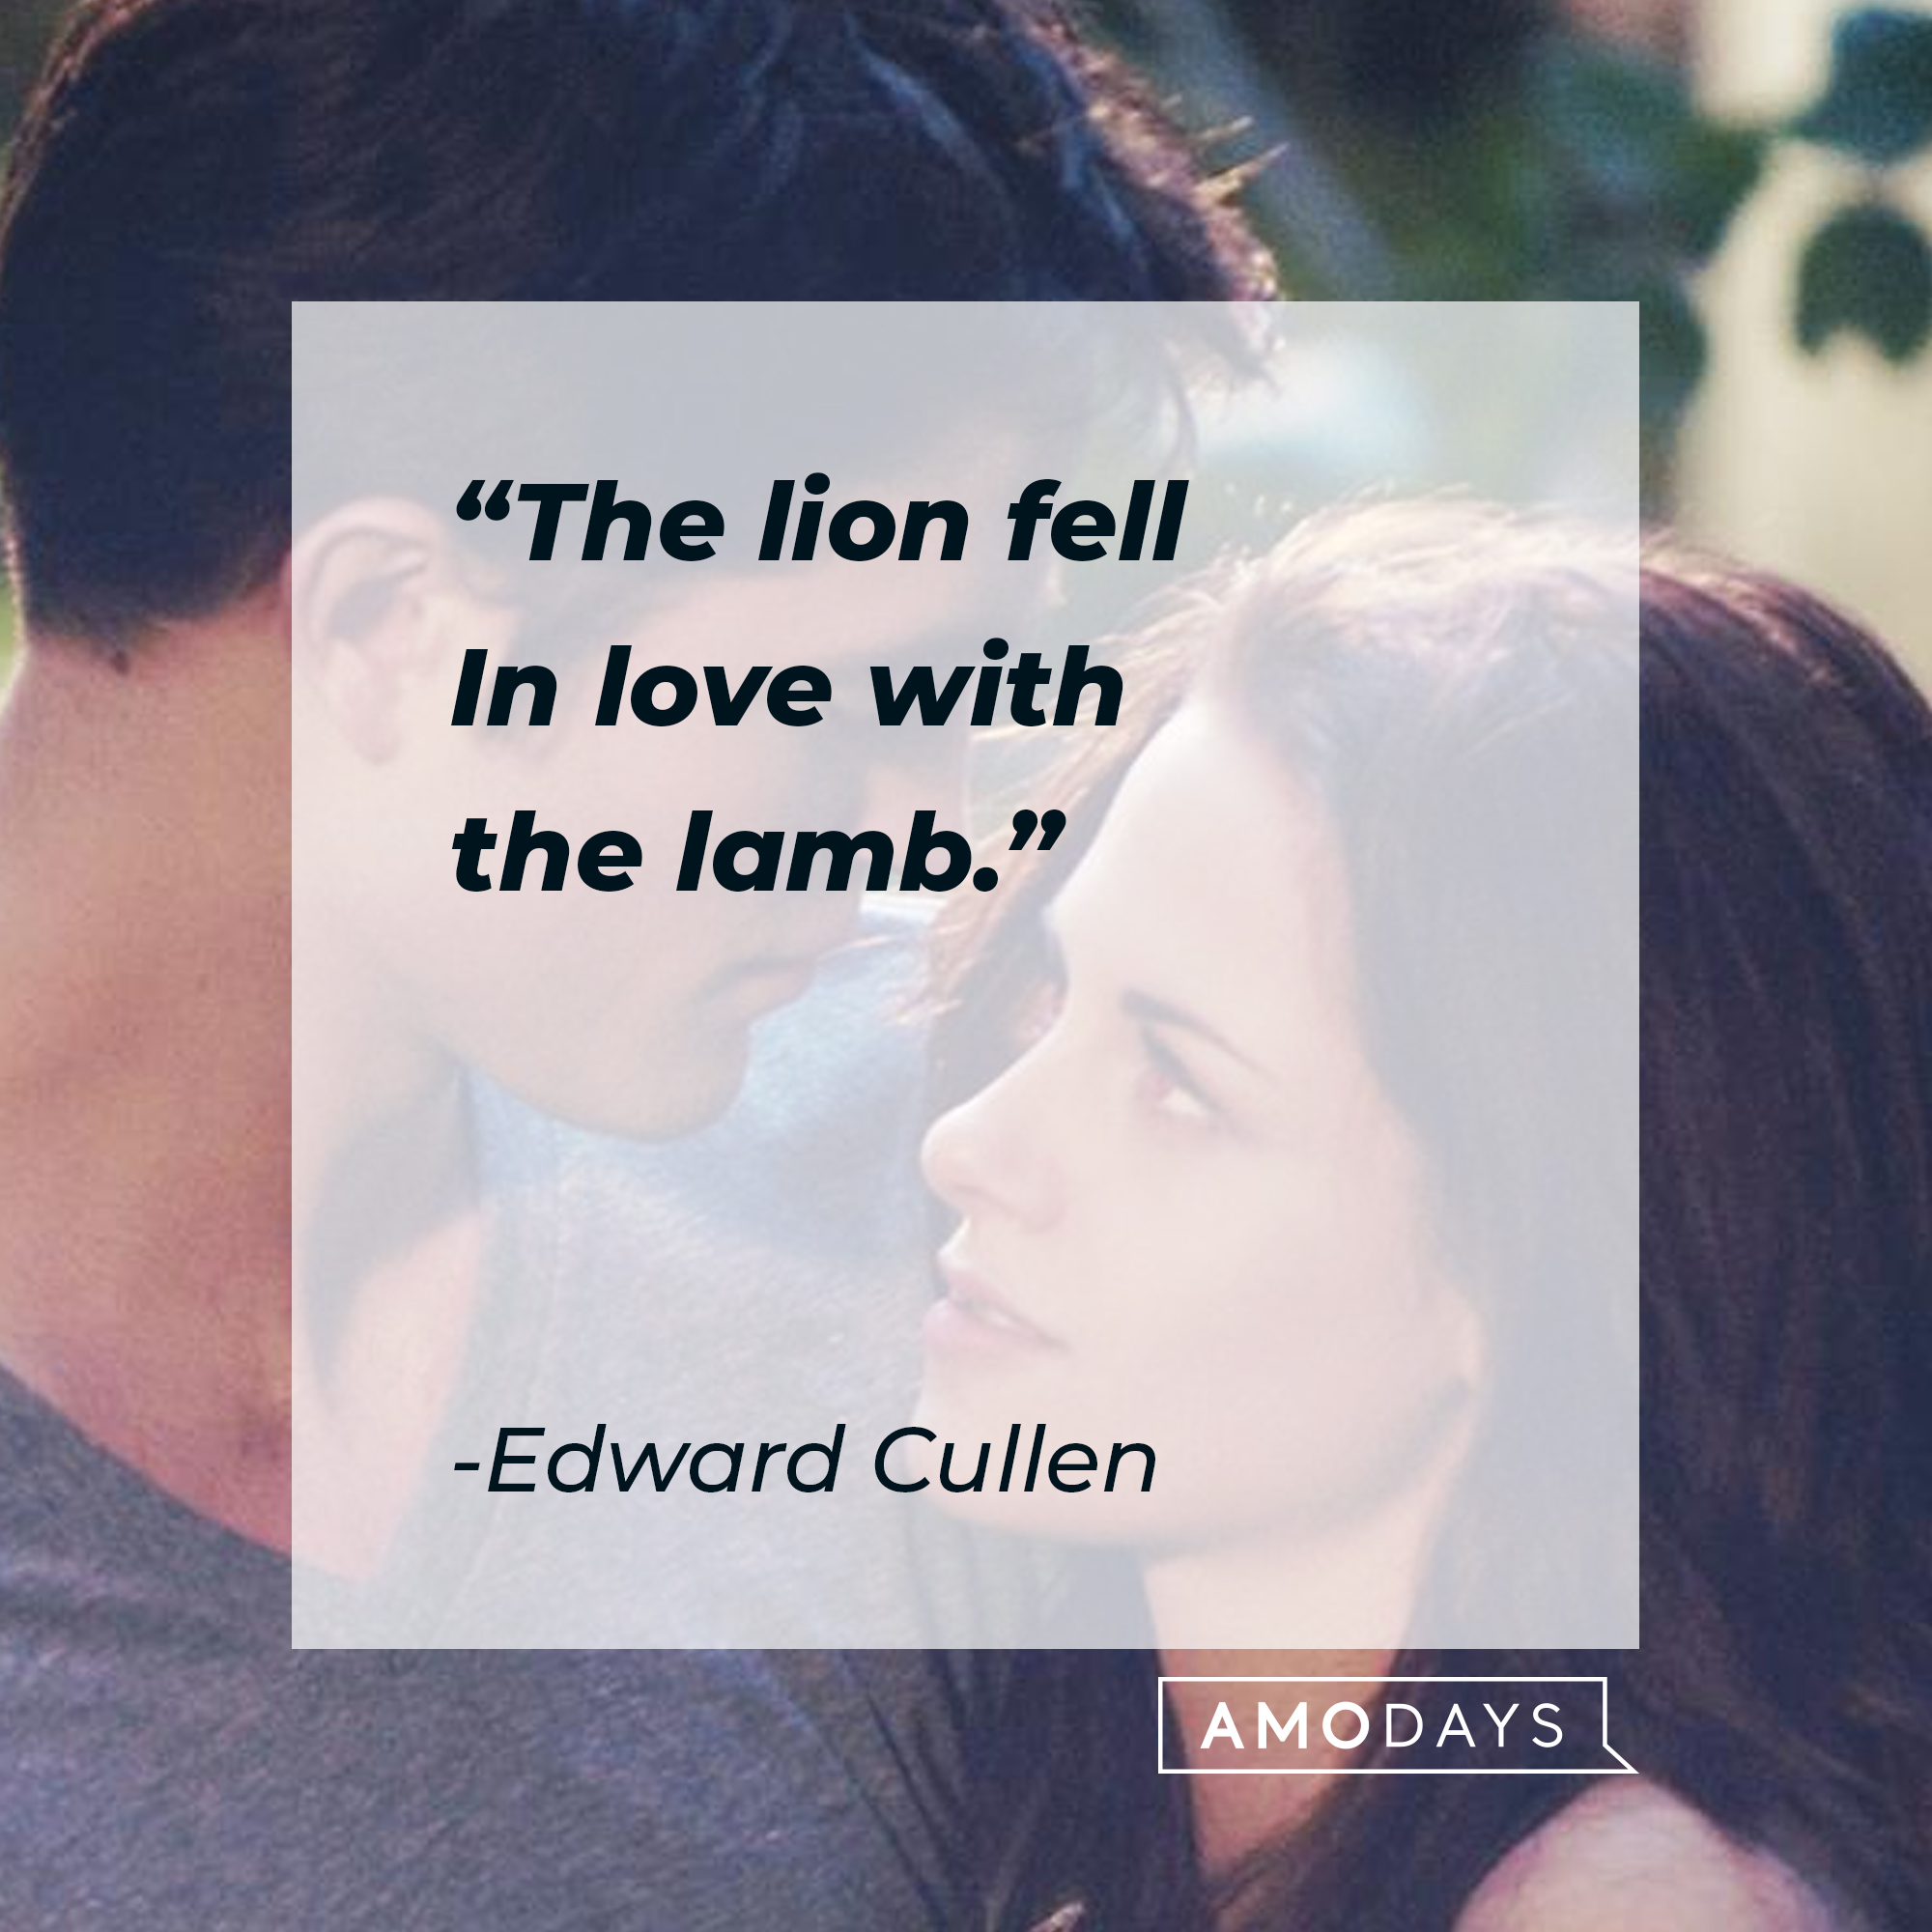 An image of Edward Cullen and Bella Swan, with Cullen’s quote: "The lion fell In love with the lamb." | Source: Facebook.com/twilight